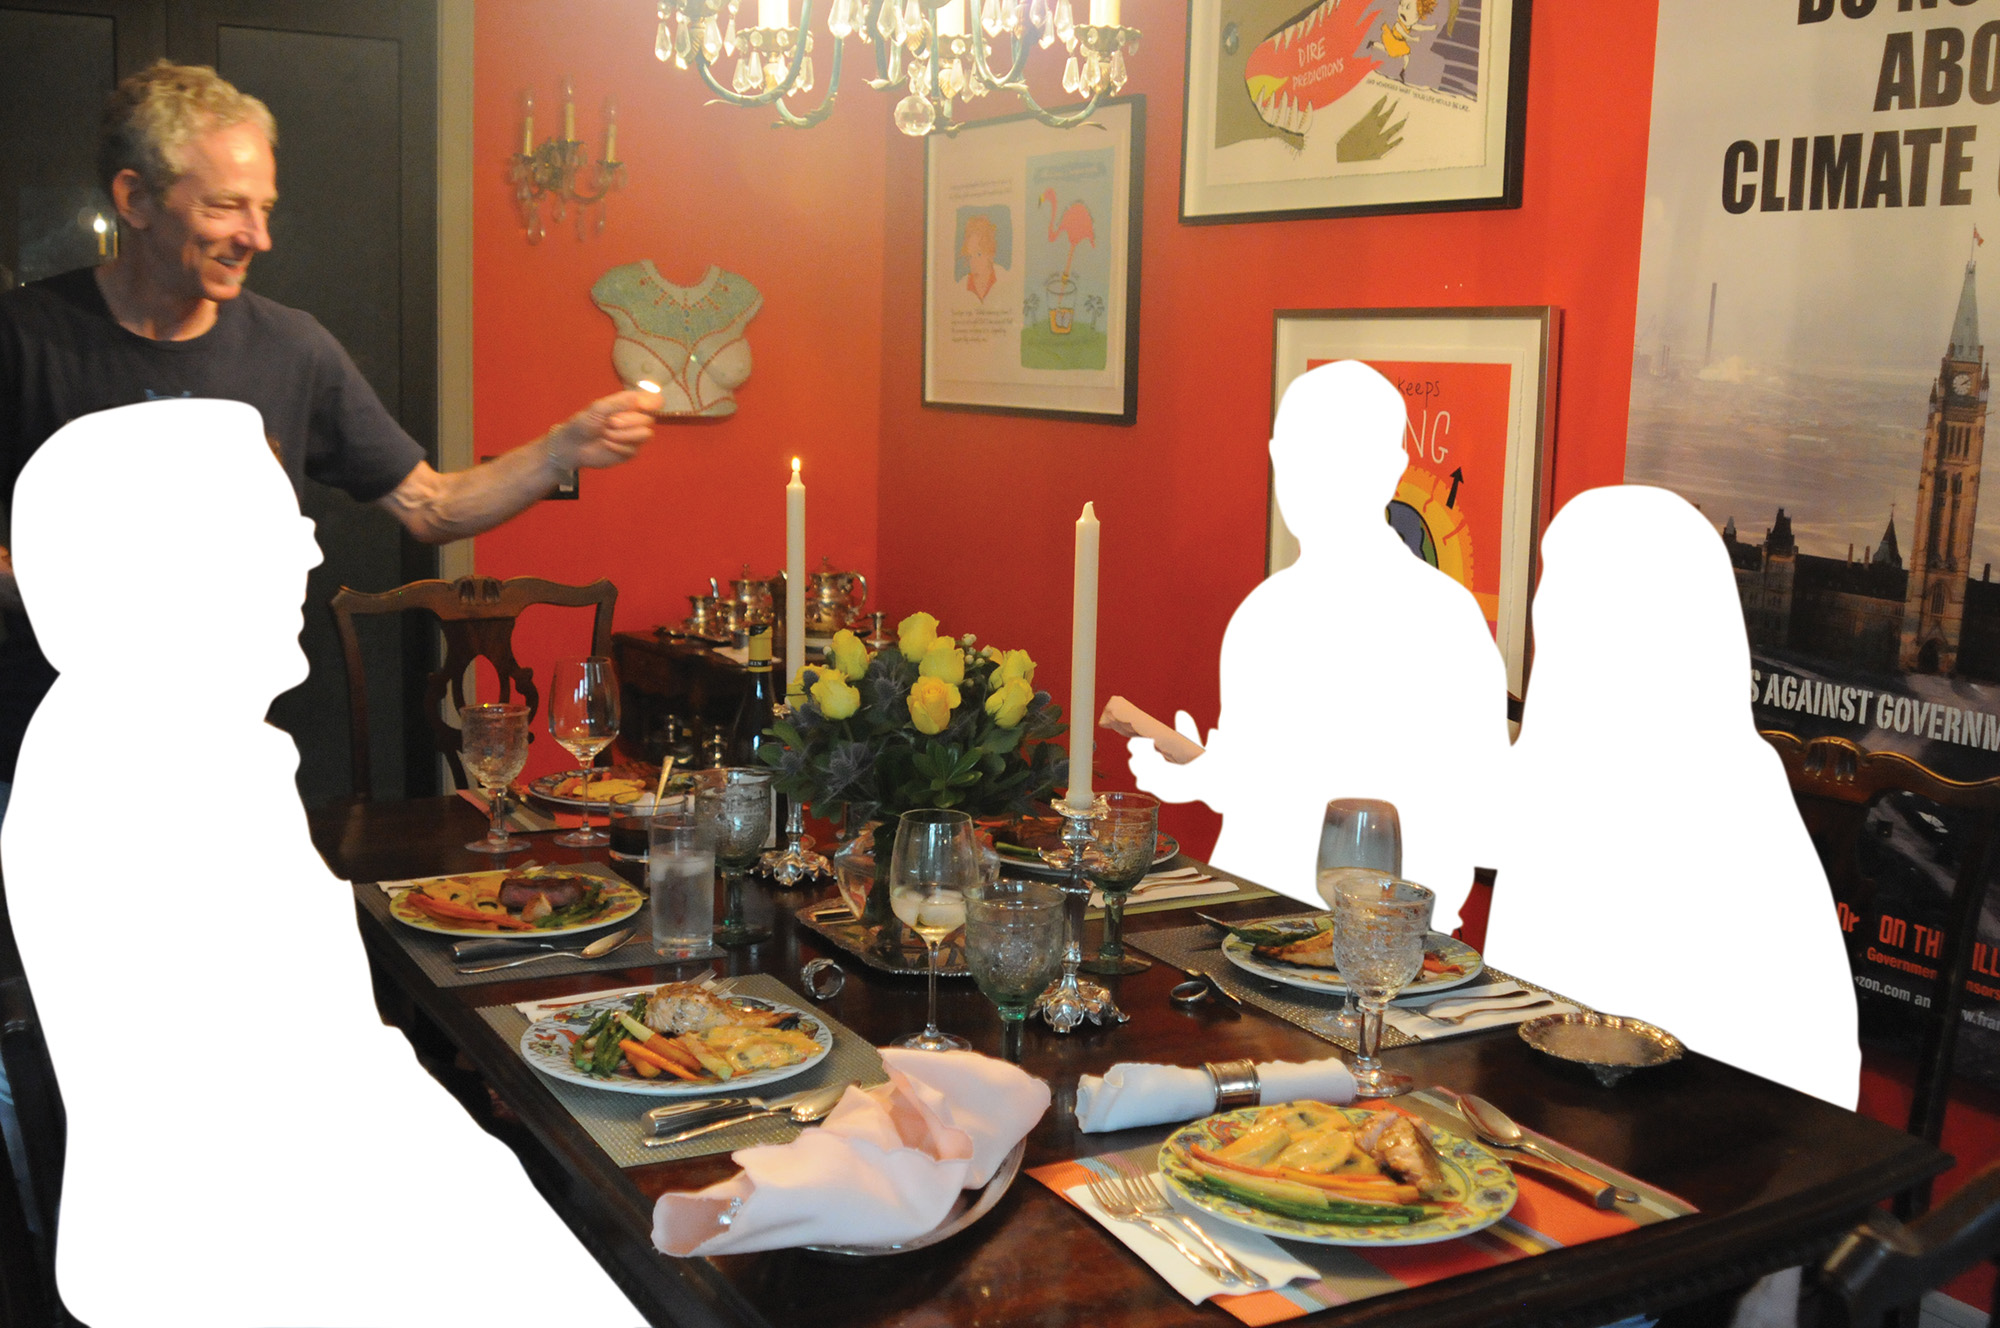 From the Dinner Party Chapter: Bill lights the candles with guests Siobhan and Jared, Phoebe and Spencer already seated for dinner. Original photo by Franke James, 2013. White silhouettes added for the book in 2023.